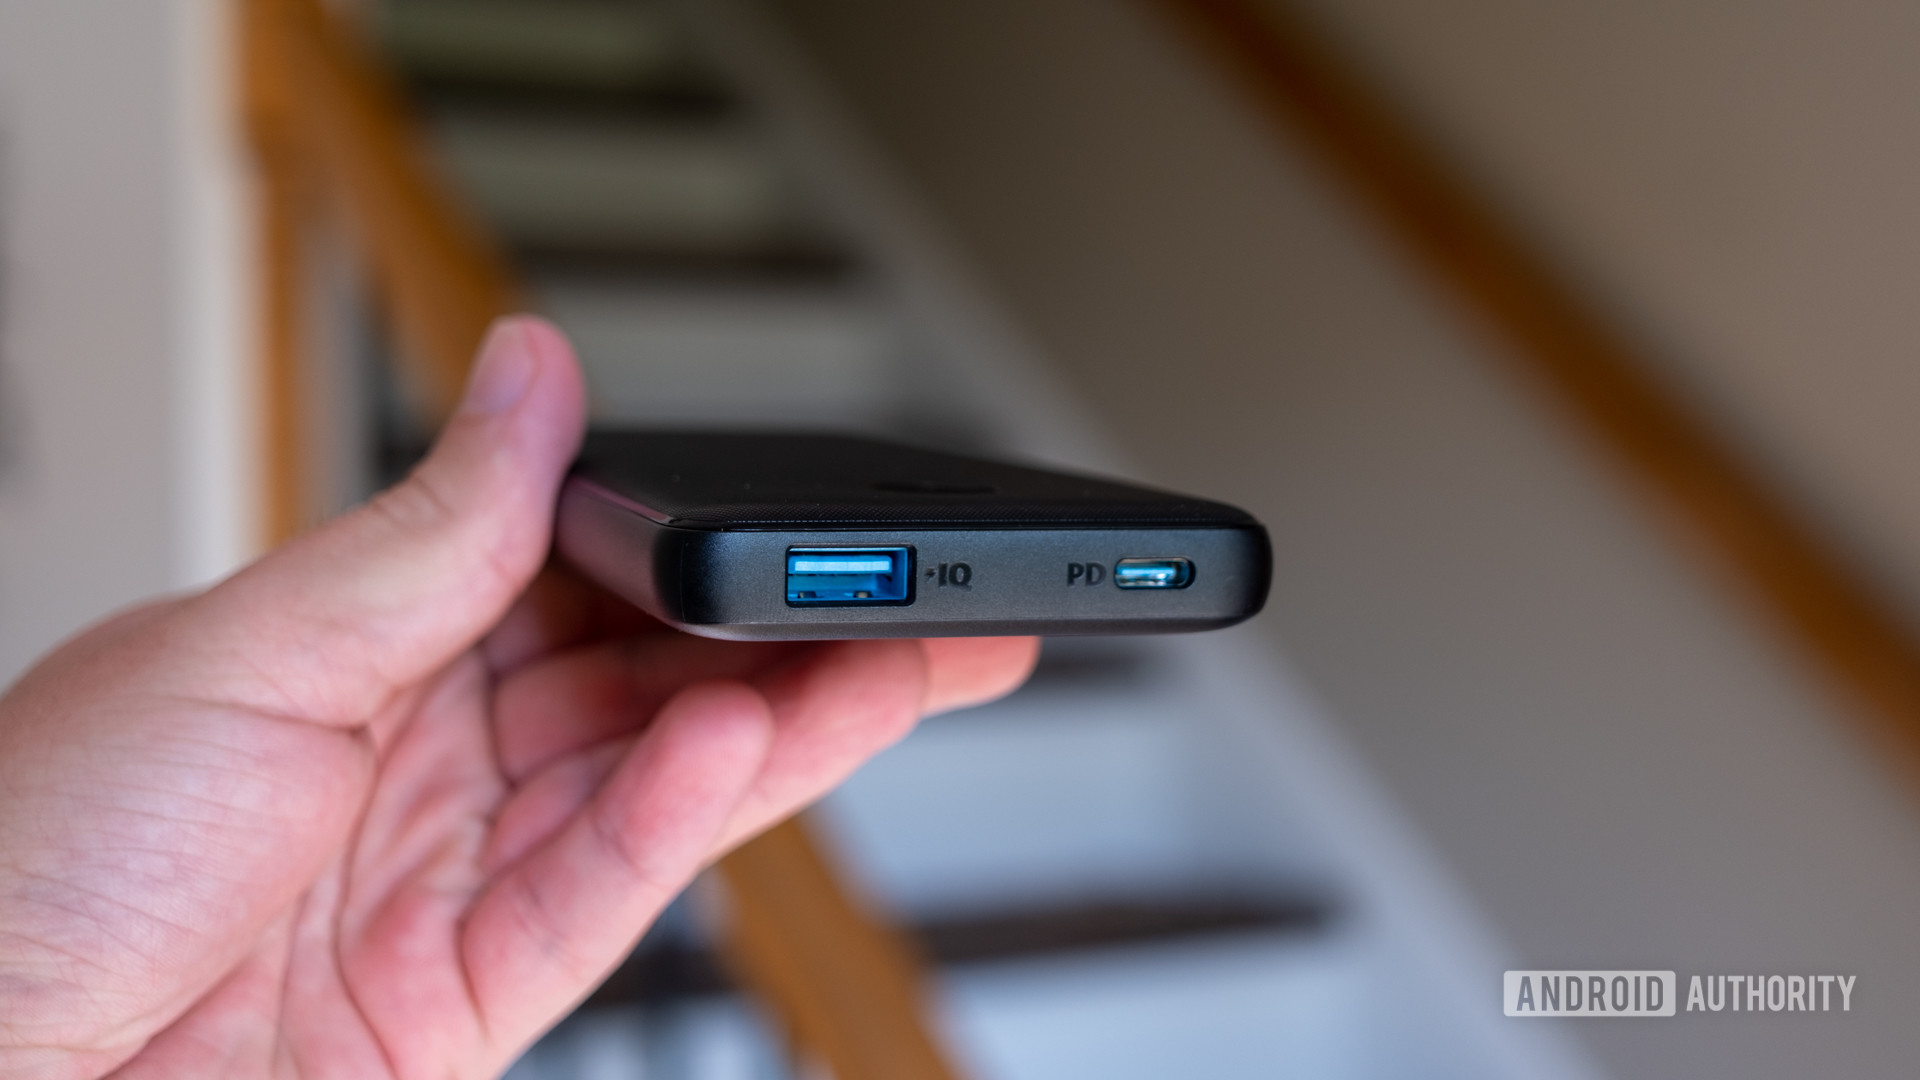 The Anker PowerCore Slim PD buttons